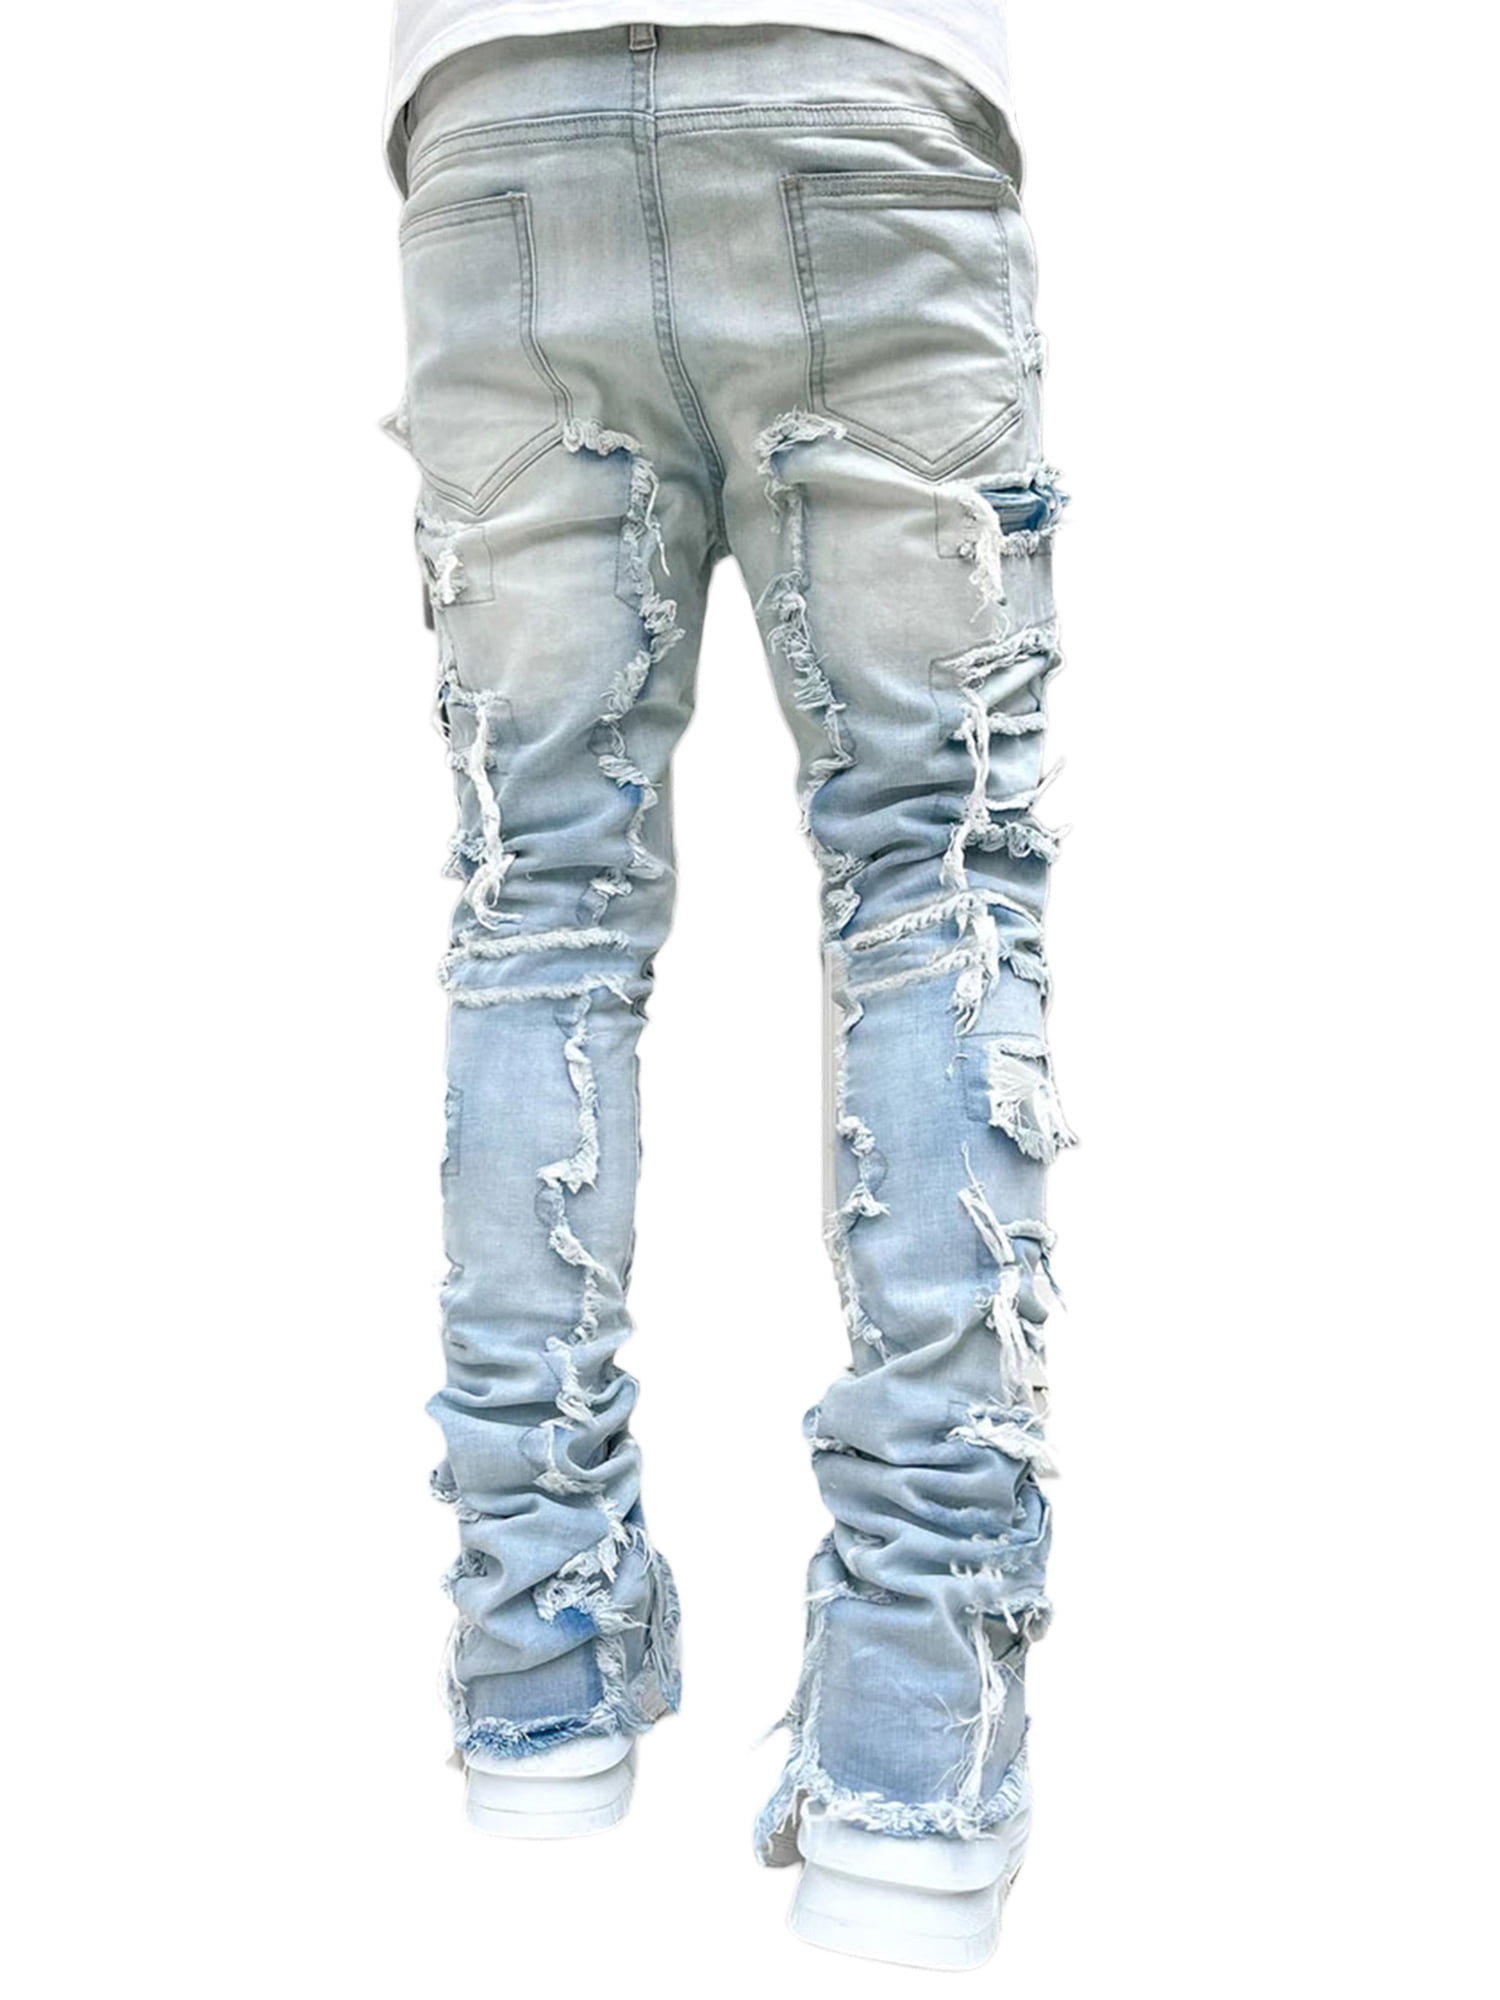 Licupiee Men Ripped Jeans Slim Fit Skinny Denim Pants Casual Tapered Leg  Knee Hole Distressed Jeans Trousers